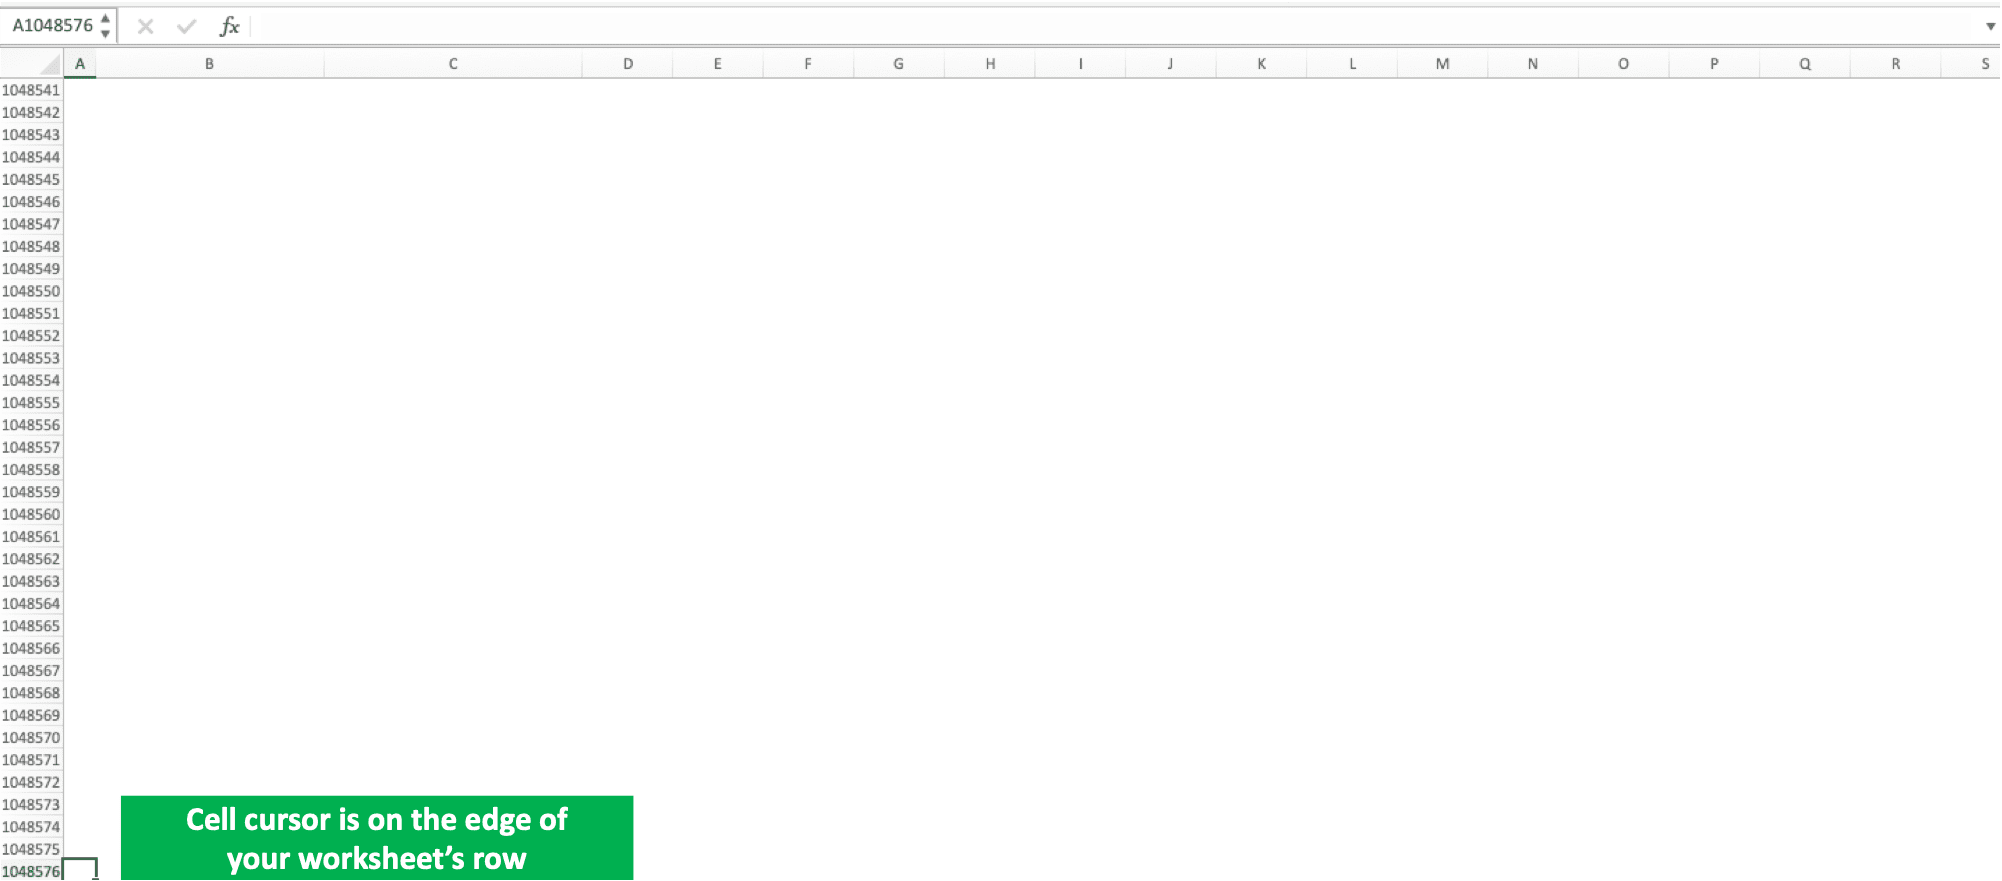 Number of Columns and Rows in Excel - Screenshot of the Cell Cursor in the Worksheet's Row Edge